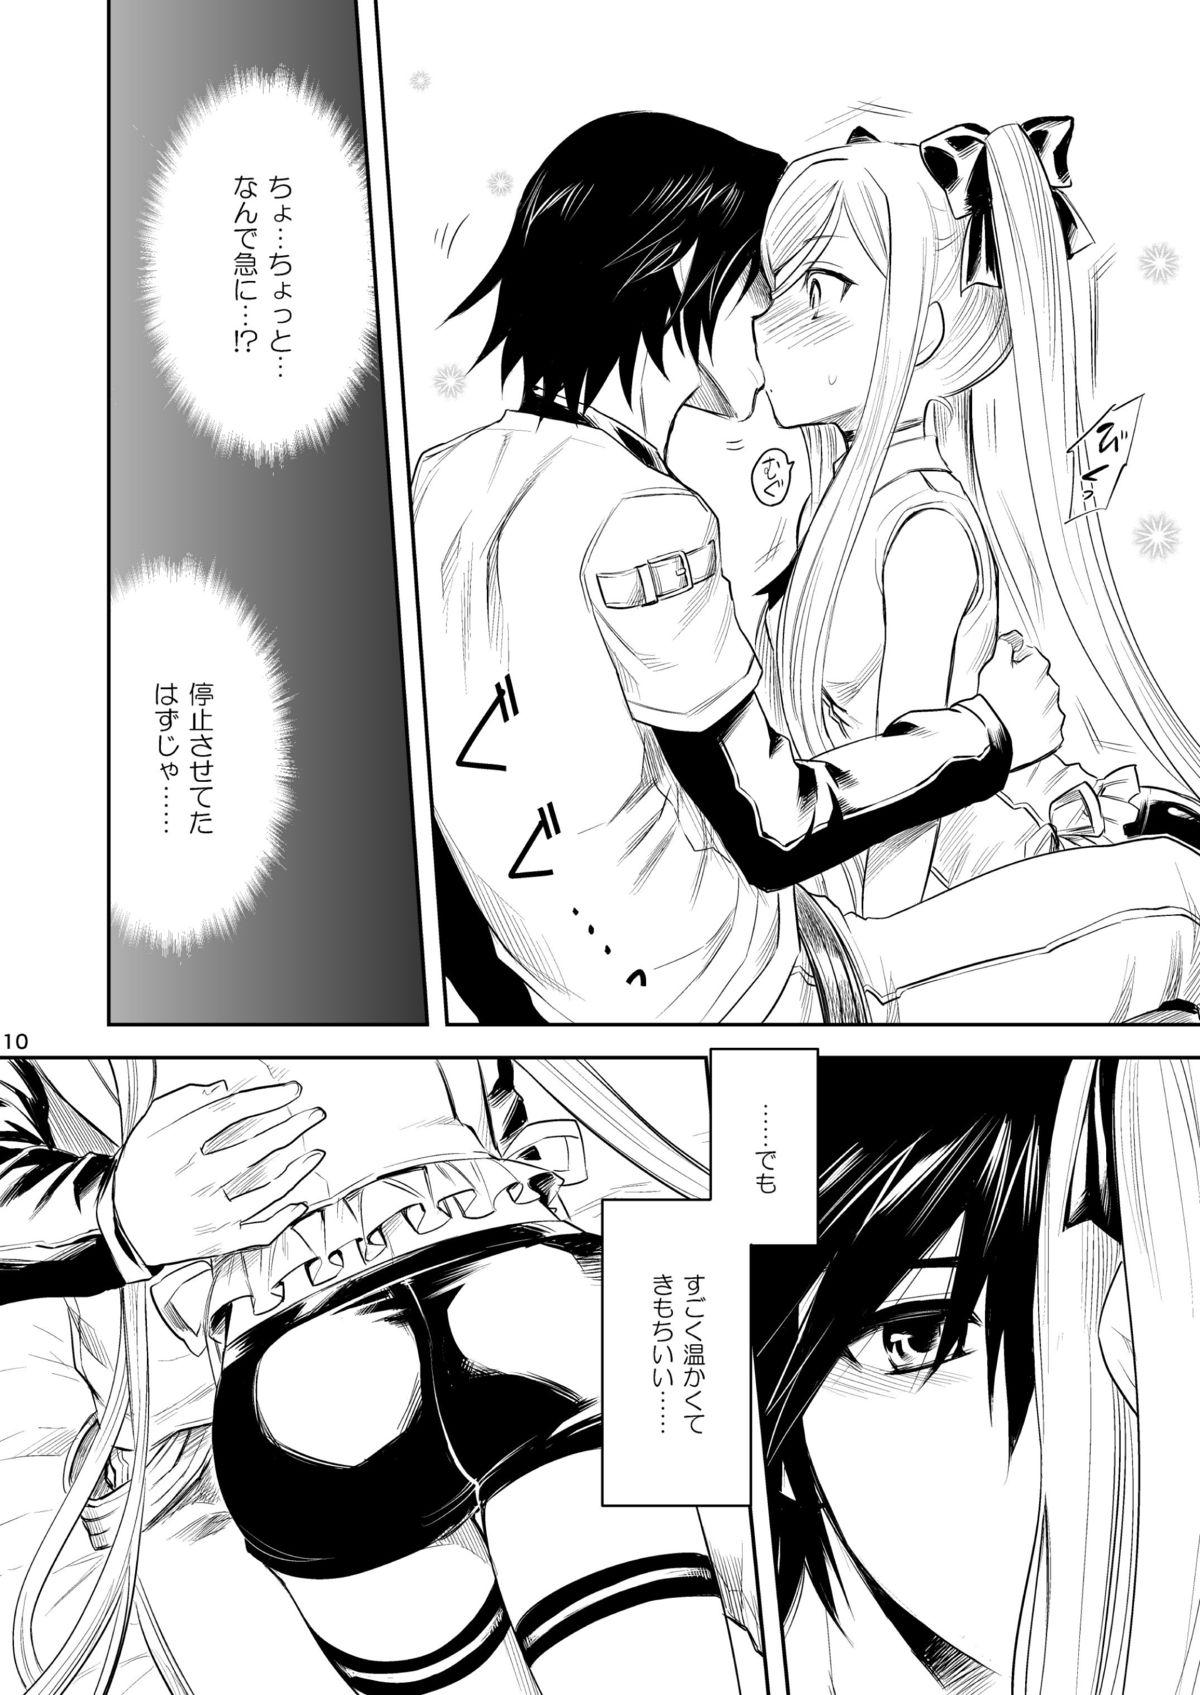 Nude Now Updating! - Arpeggio of blue steel Bubble - Page 9